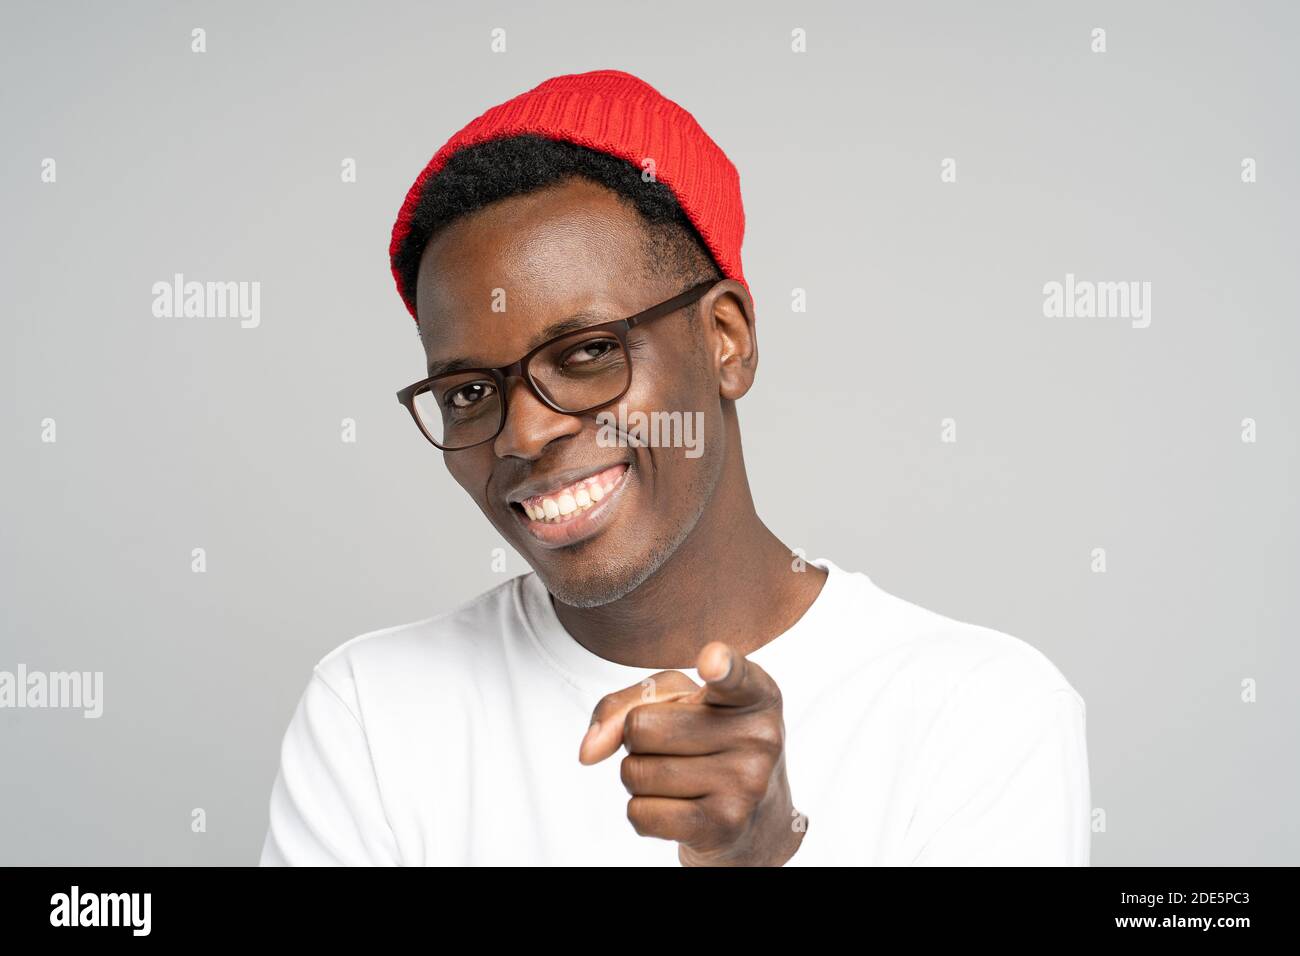 Hey, You! Cheerful positive young Afro American man wear red hat in good mood smiling broadly, pointing you while standing against studio grey backgro Stock Photo